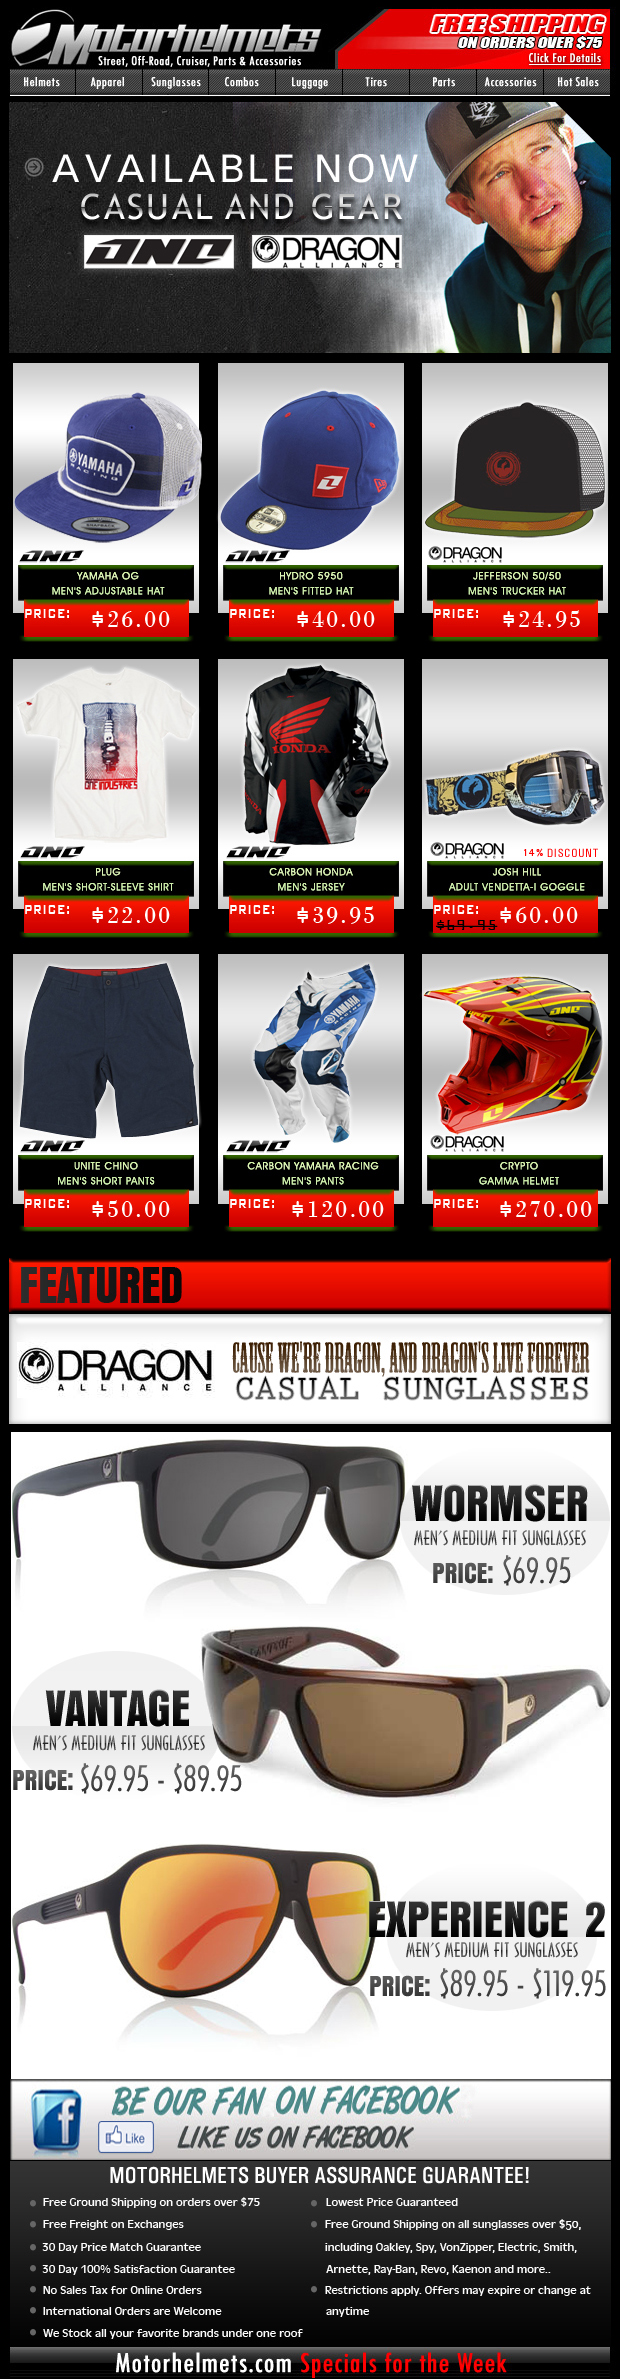 Post V-Day Shopping? Try these Premium Items from One and Dragon...